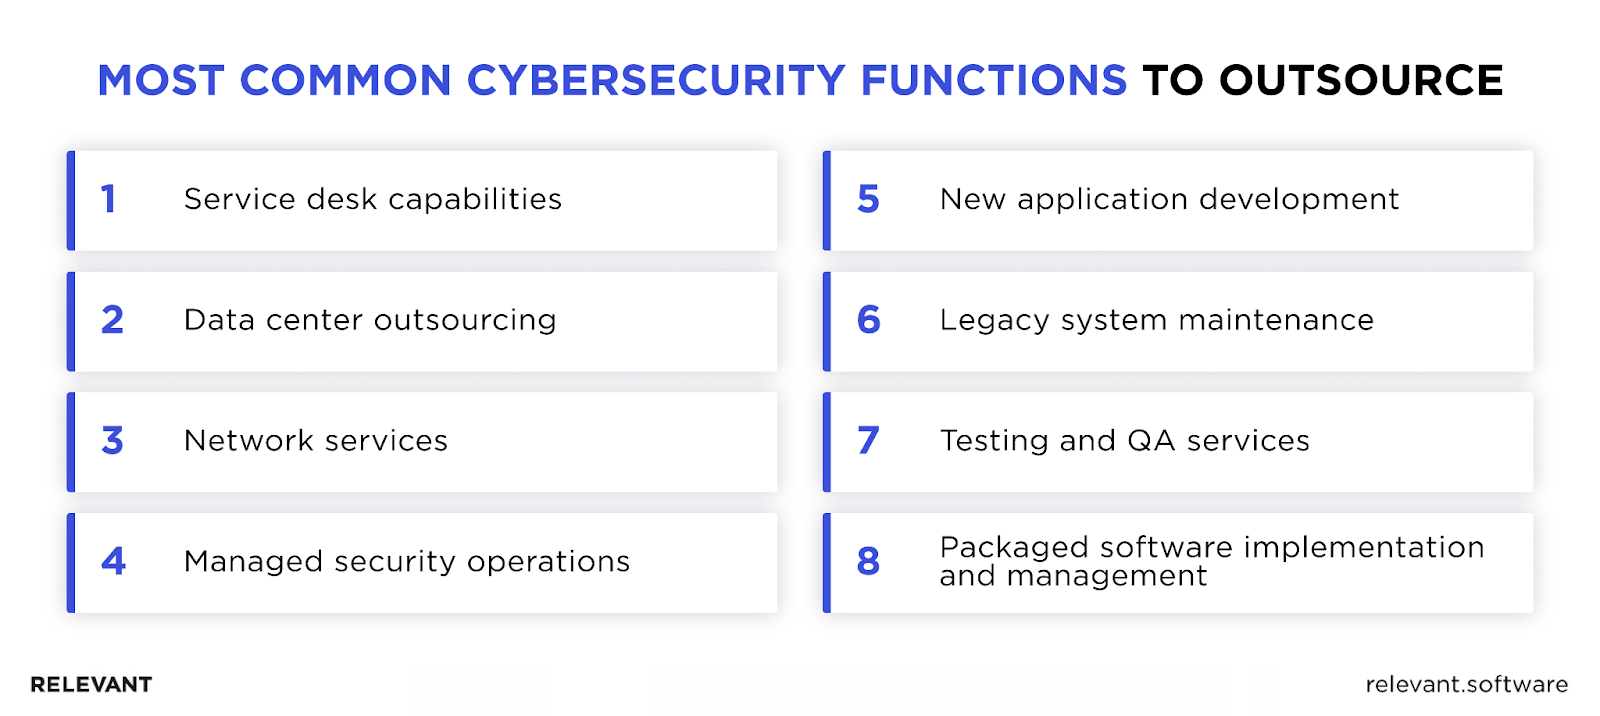 Cybersecurity Functions to Outsource